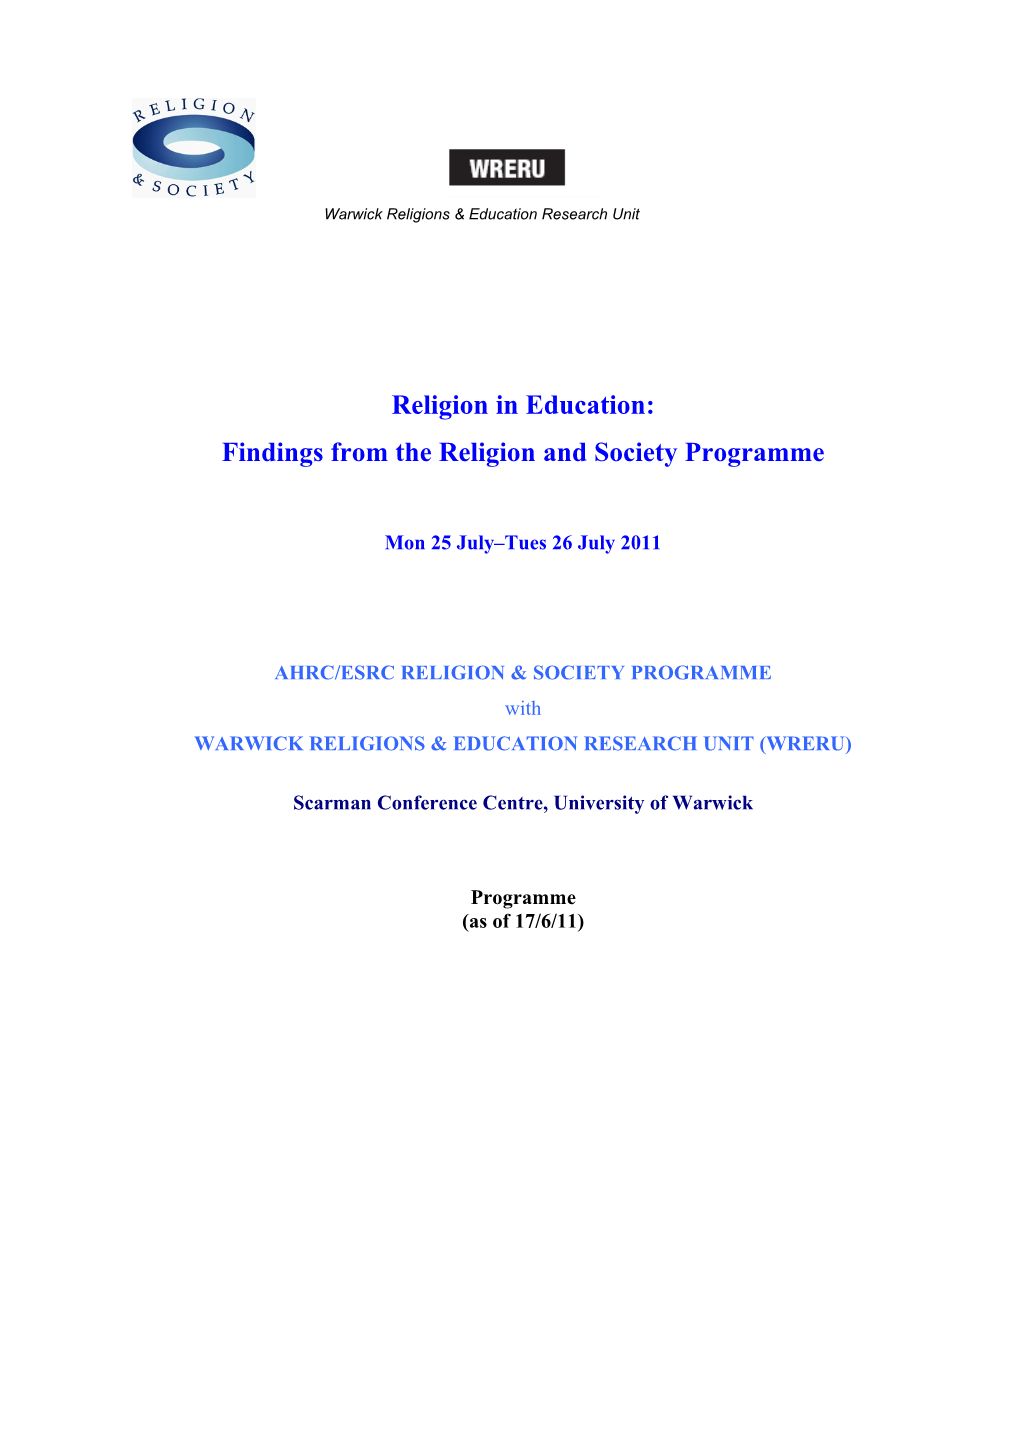 Findings from the Religion and Society Programme